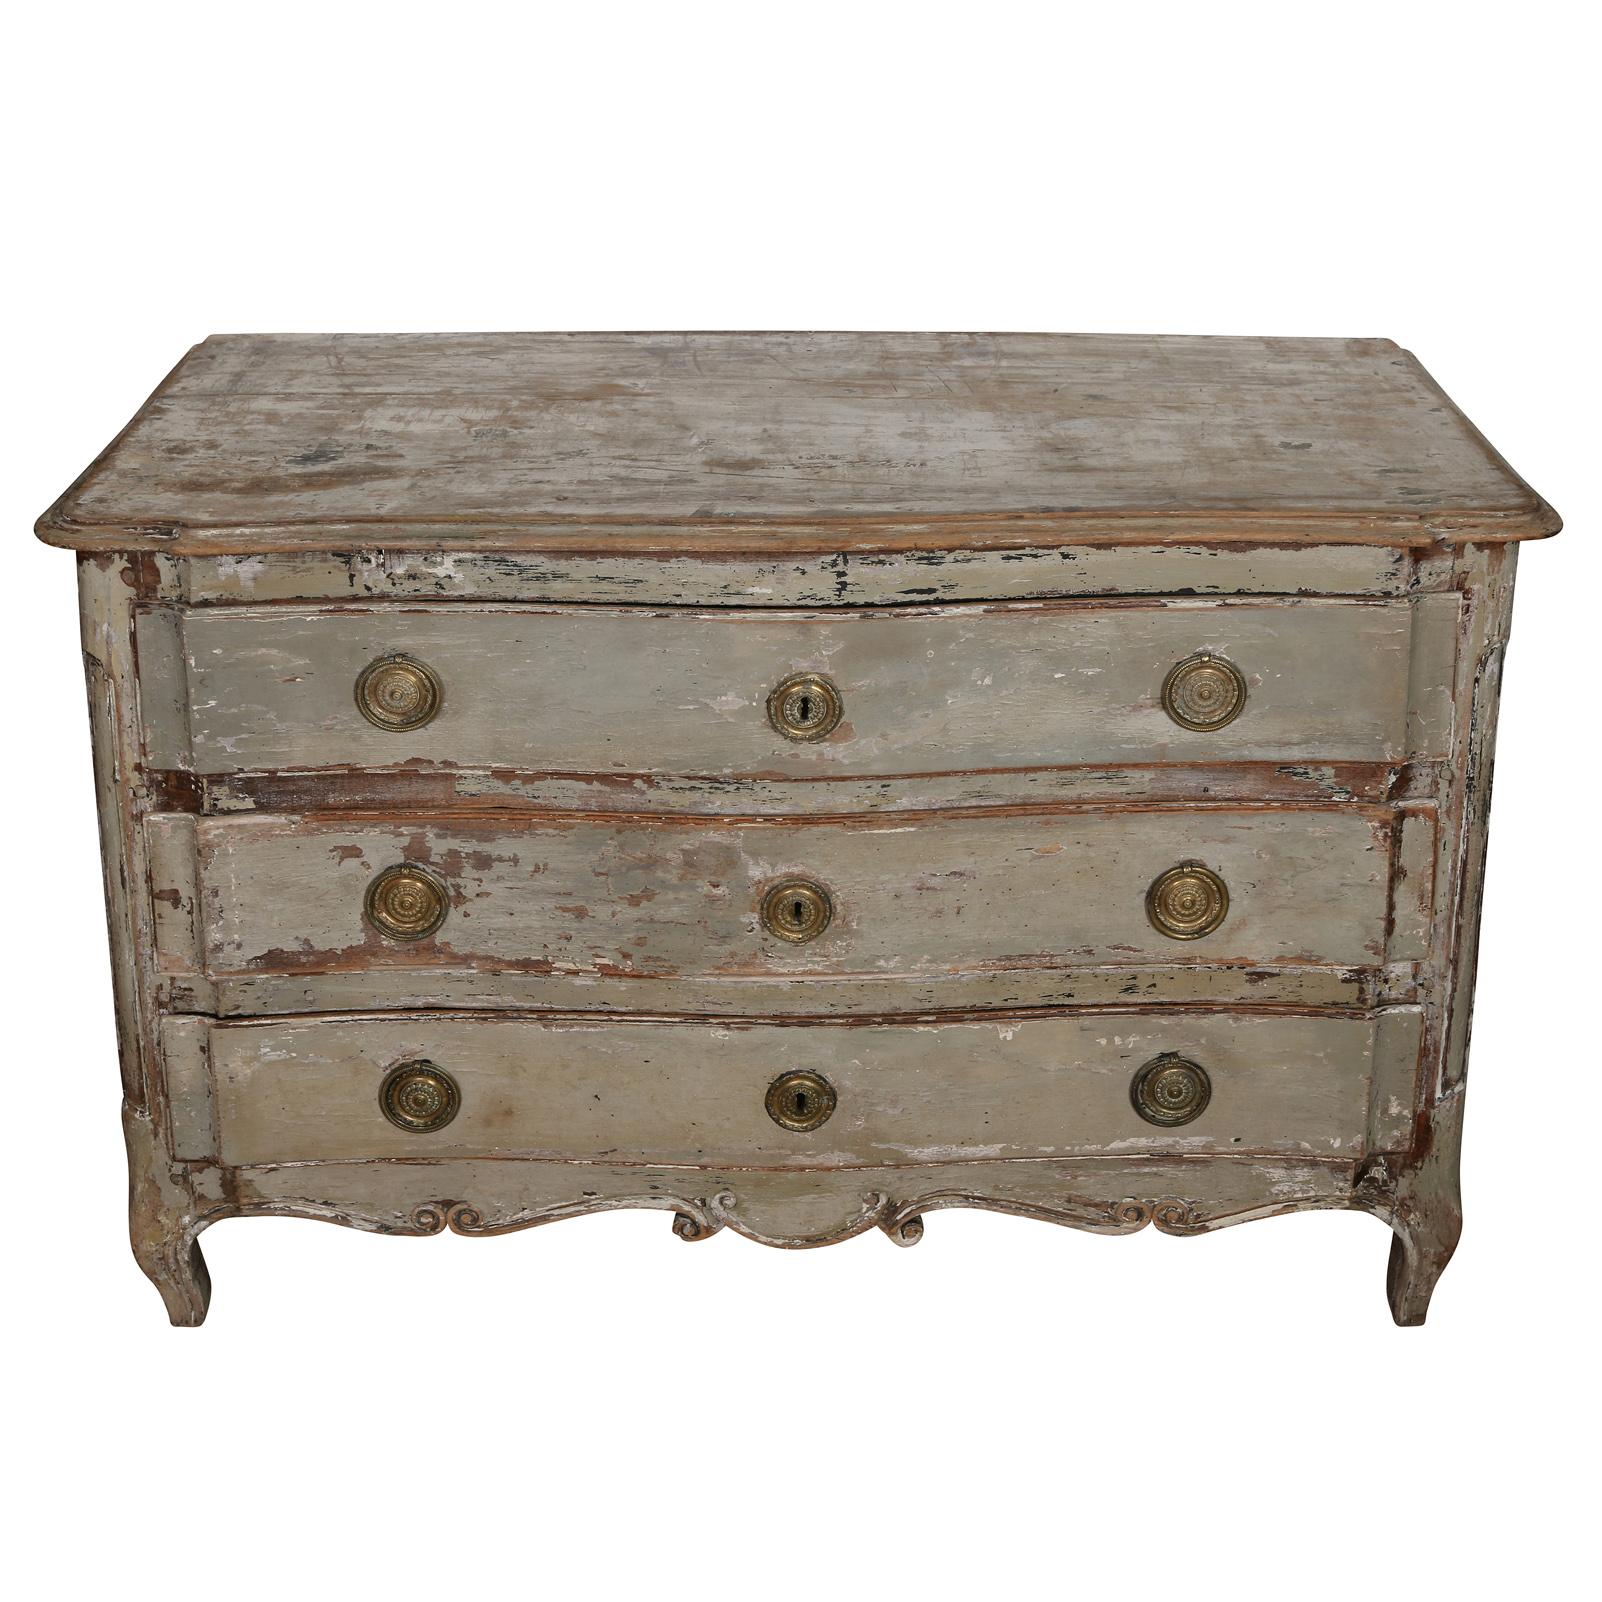 We love this Louis XV style commode for its soft blue/grey finish and the soft patina it has developed over time.  This elegant piece has three generous raised  panel drawers with original bronze pulls and lovely floral shaped escutcheons. The top